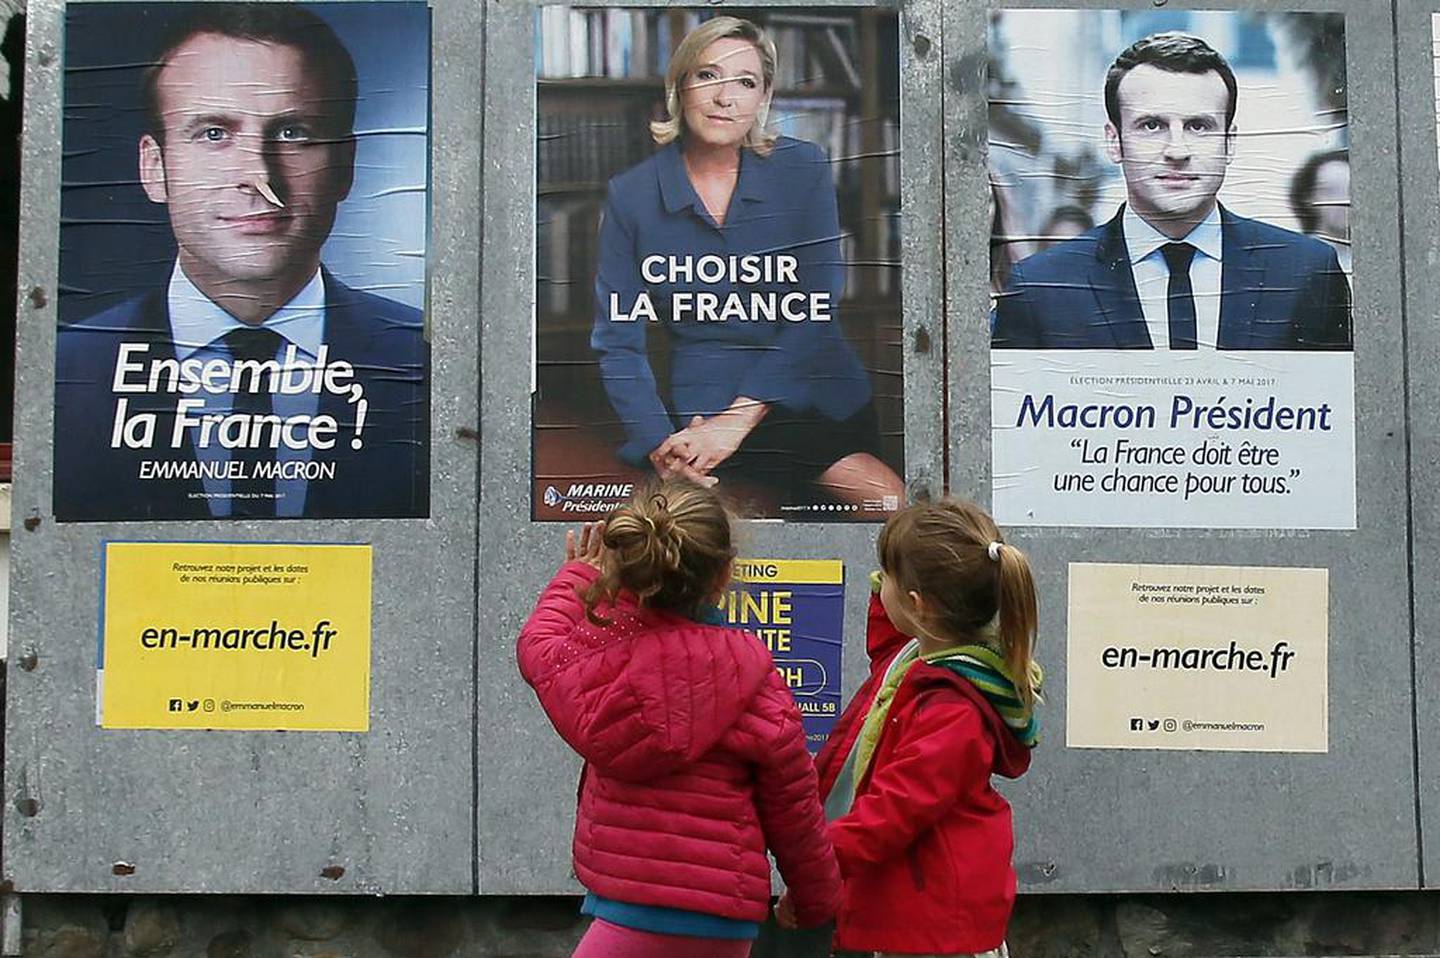 Emmanuel Macron and Marine Le Pen were the top two candidates in 2017 and could face a rematch. AP